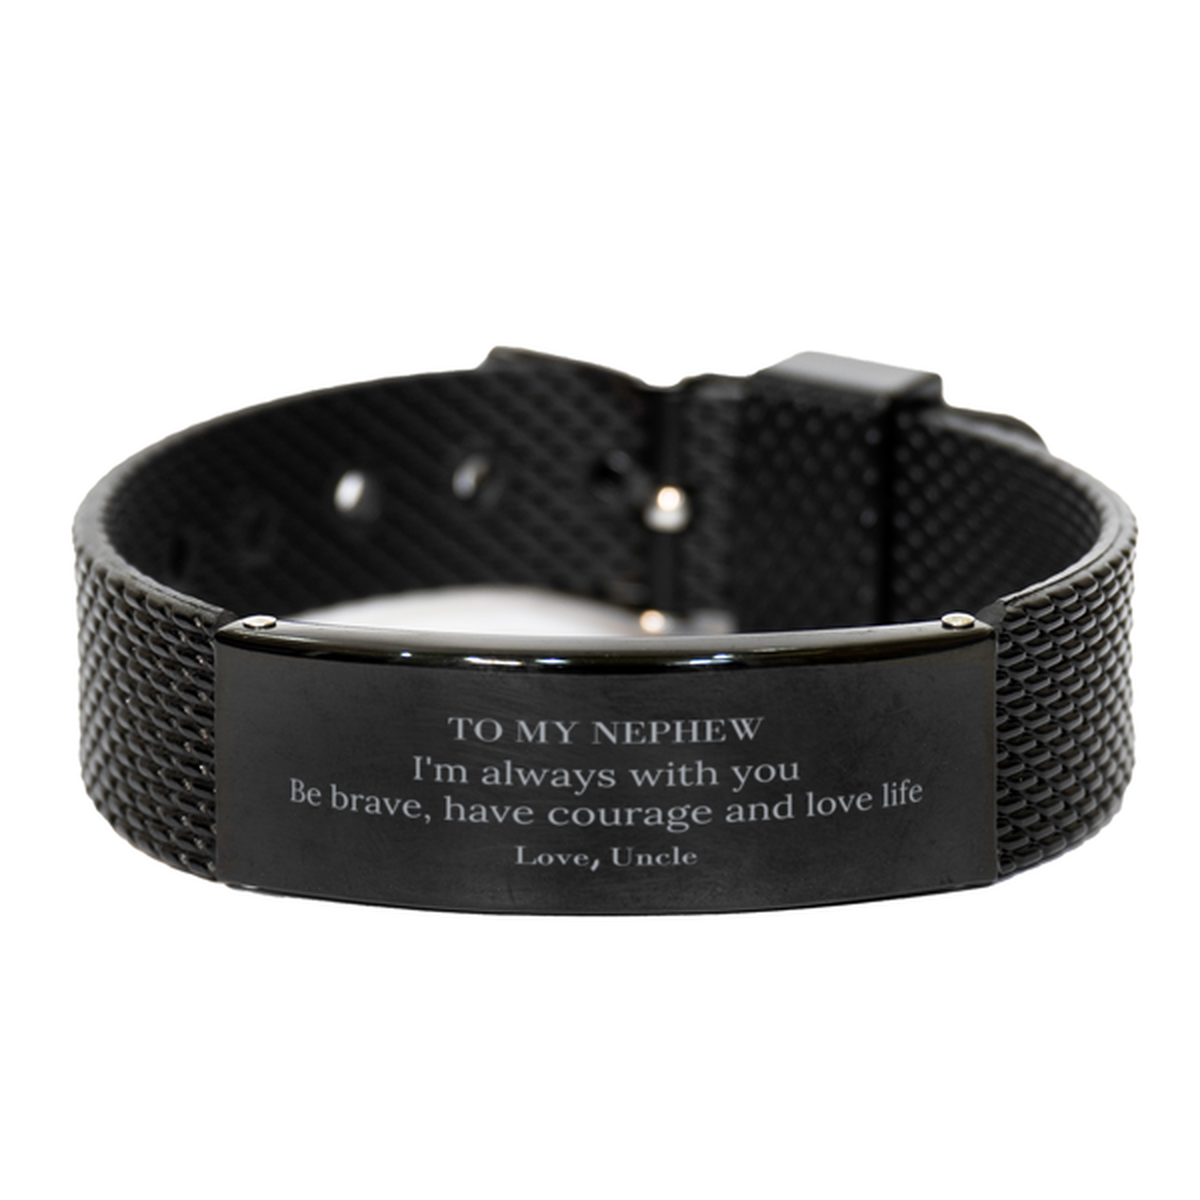 To My Nephew Gifts from Uncle, Unique Black Shark Mesh Bracelet Inspirational Christmas Birthday Graduation Gifts for Nephew I'm always with you. Be brave, have courage and love life. Love, Uncle